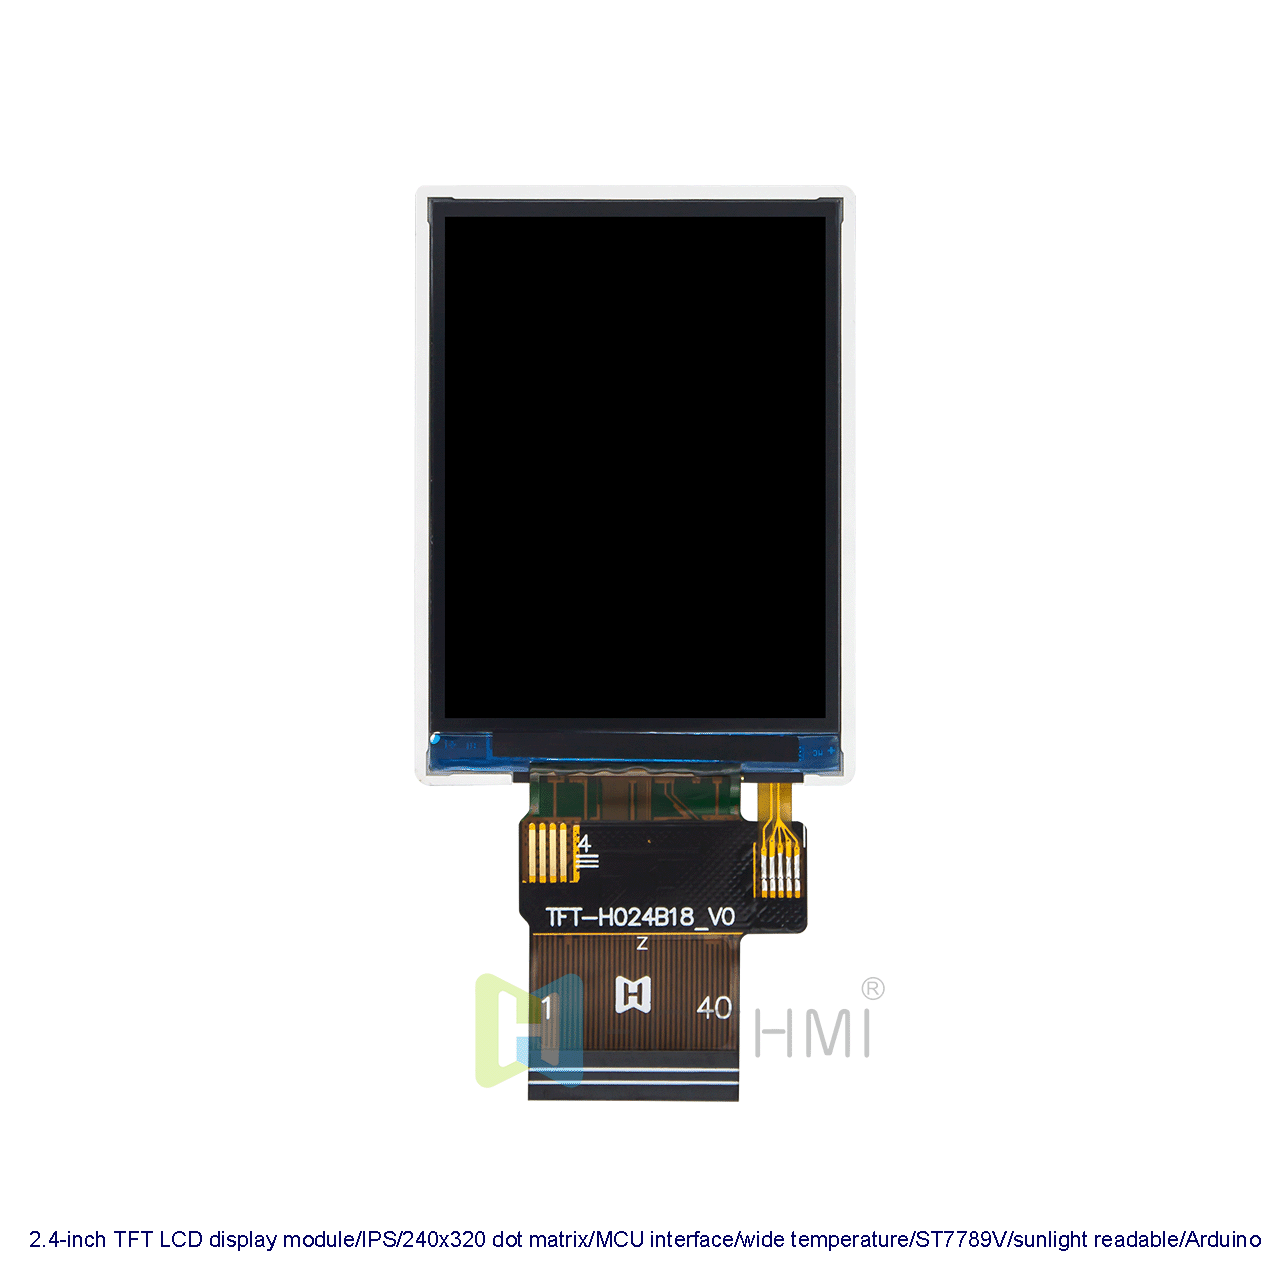 2.4-inch TFT LCD display module/IPS full viewing angle/240x320 dot matrix/MCU interface/wide temperature/ST7789V/sunlight readable/Arduino compatible